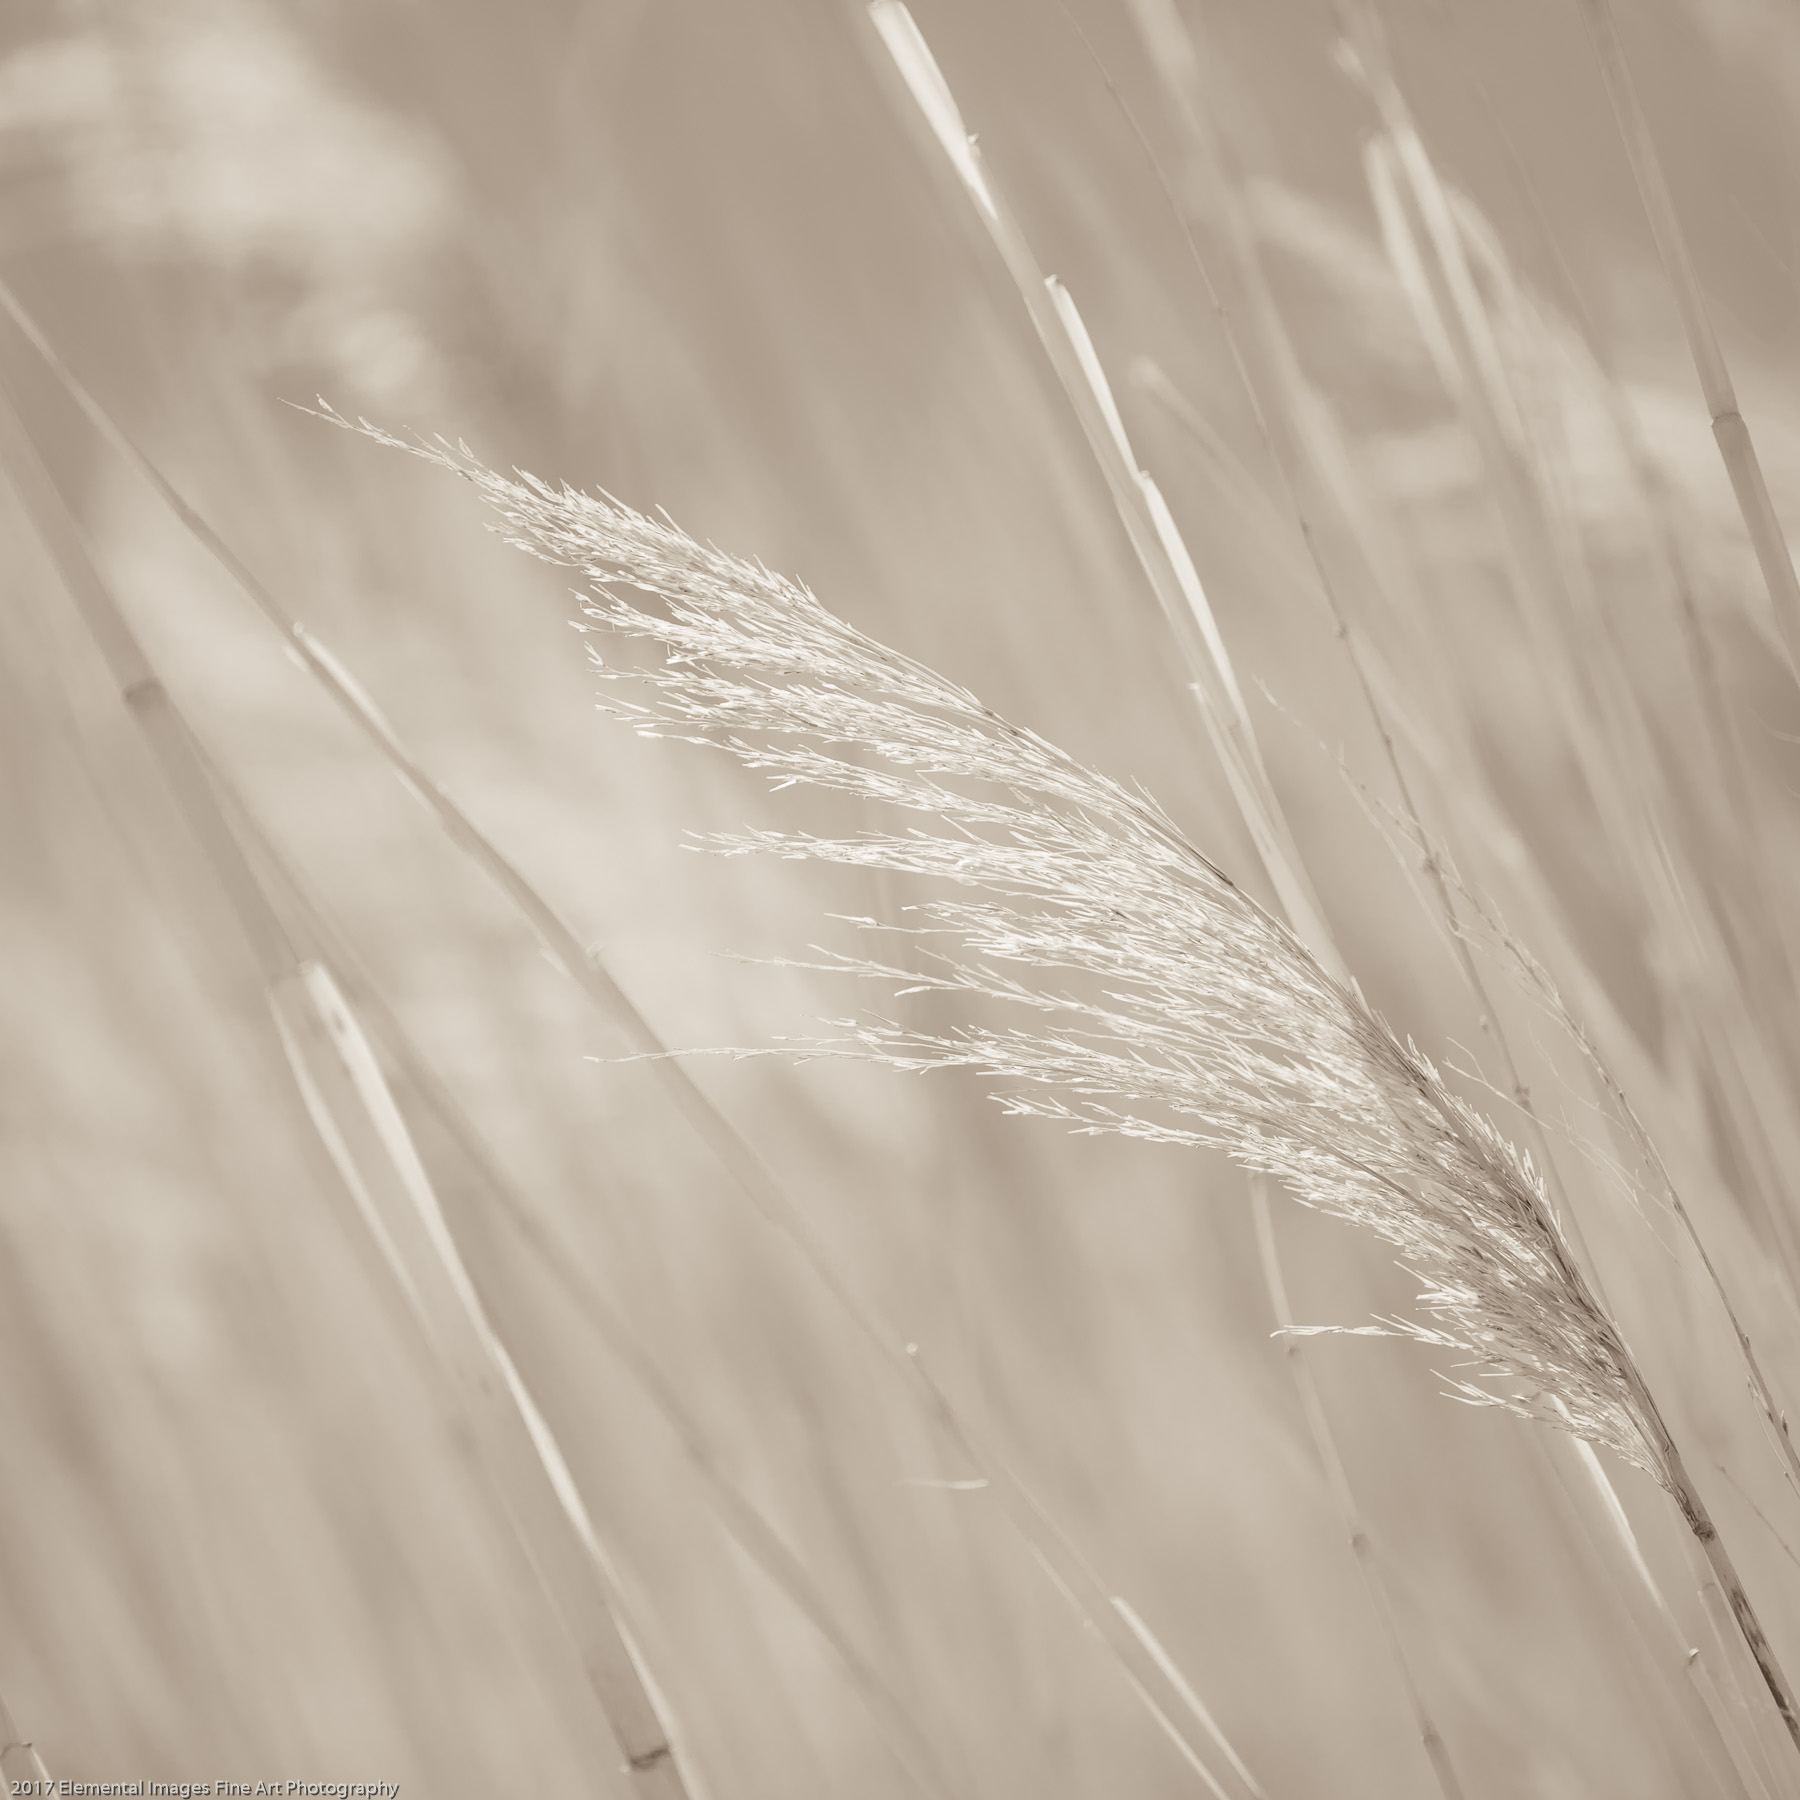 Grasses #148 | Summer Lake | OR | USA - © 2017 Elemental Images Fine Art Photography - All Rights Reserved Worldwide